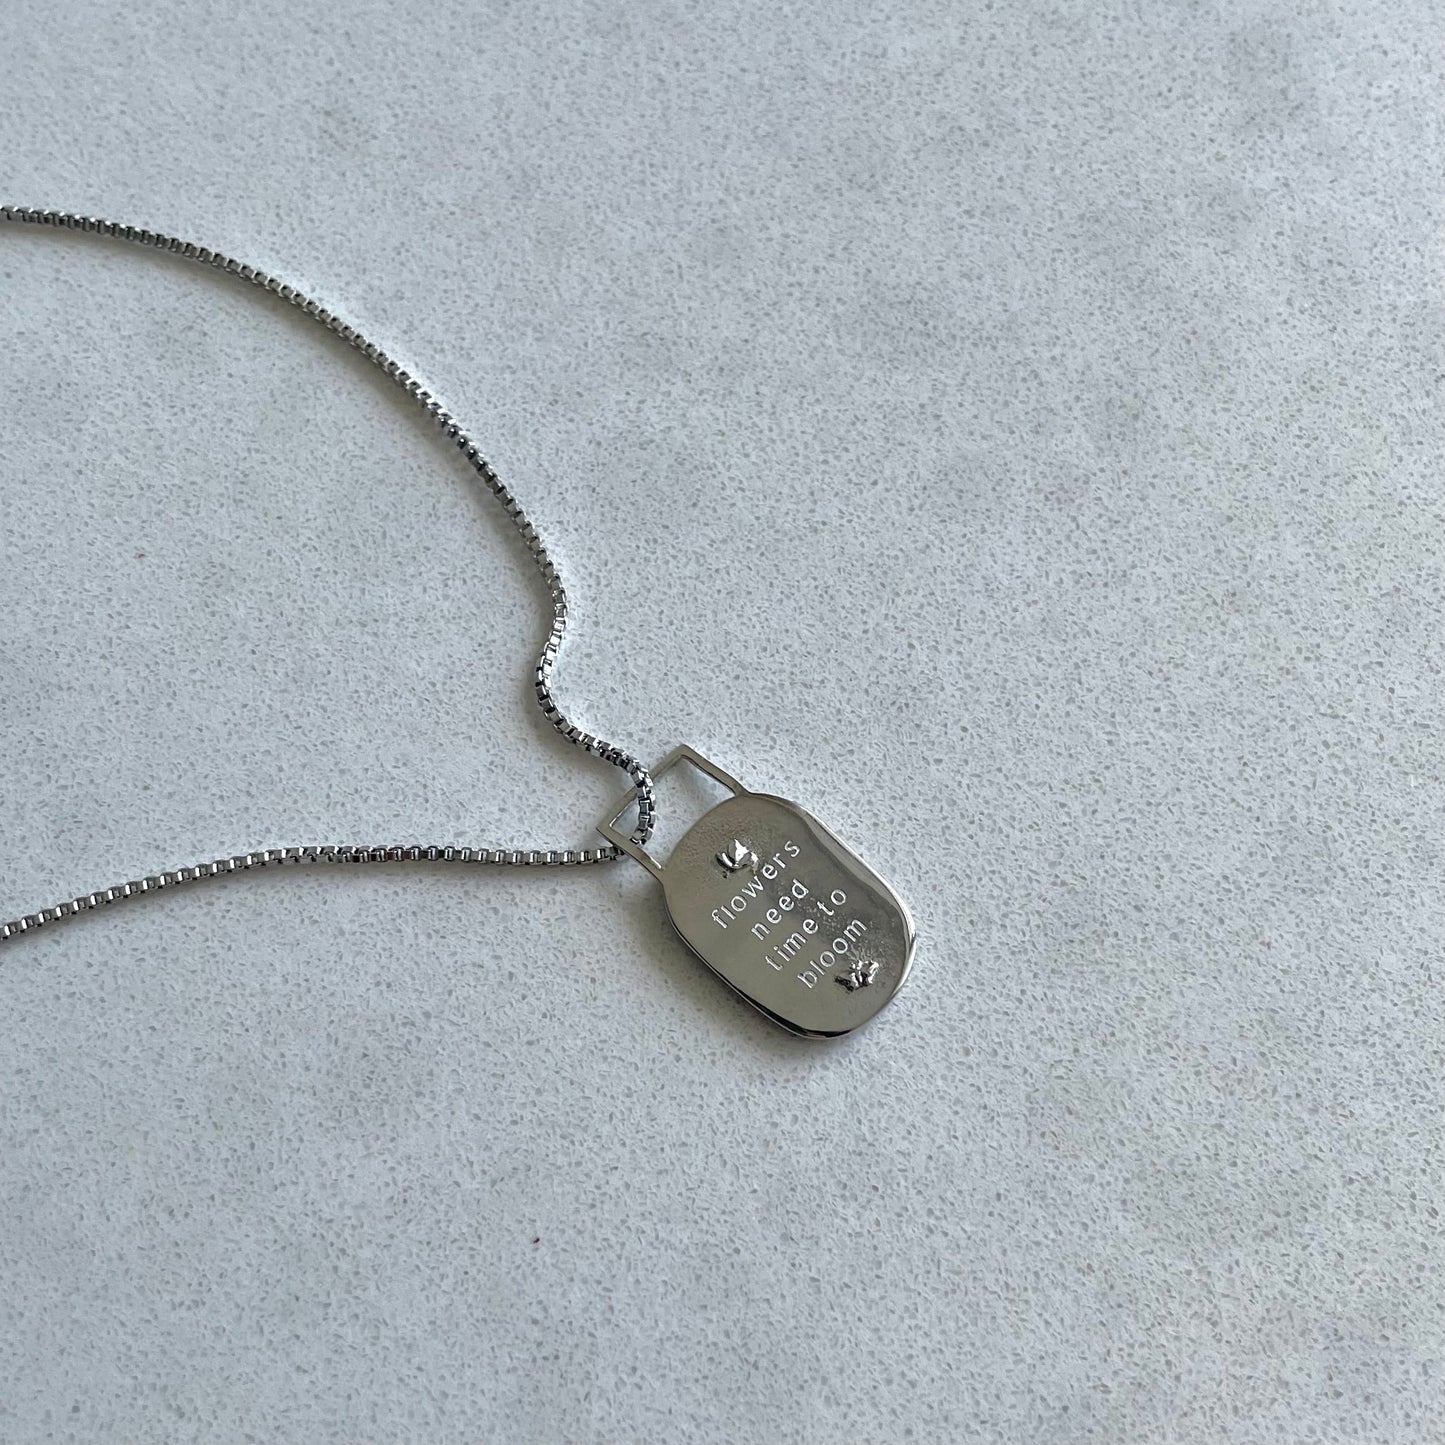 Bloom Affirmation Necklace- Silver - Namaste Jewelry Canada